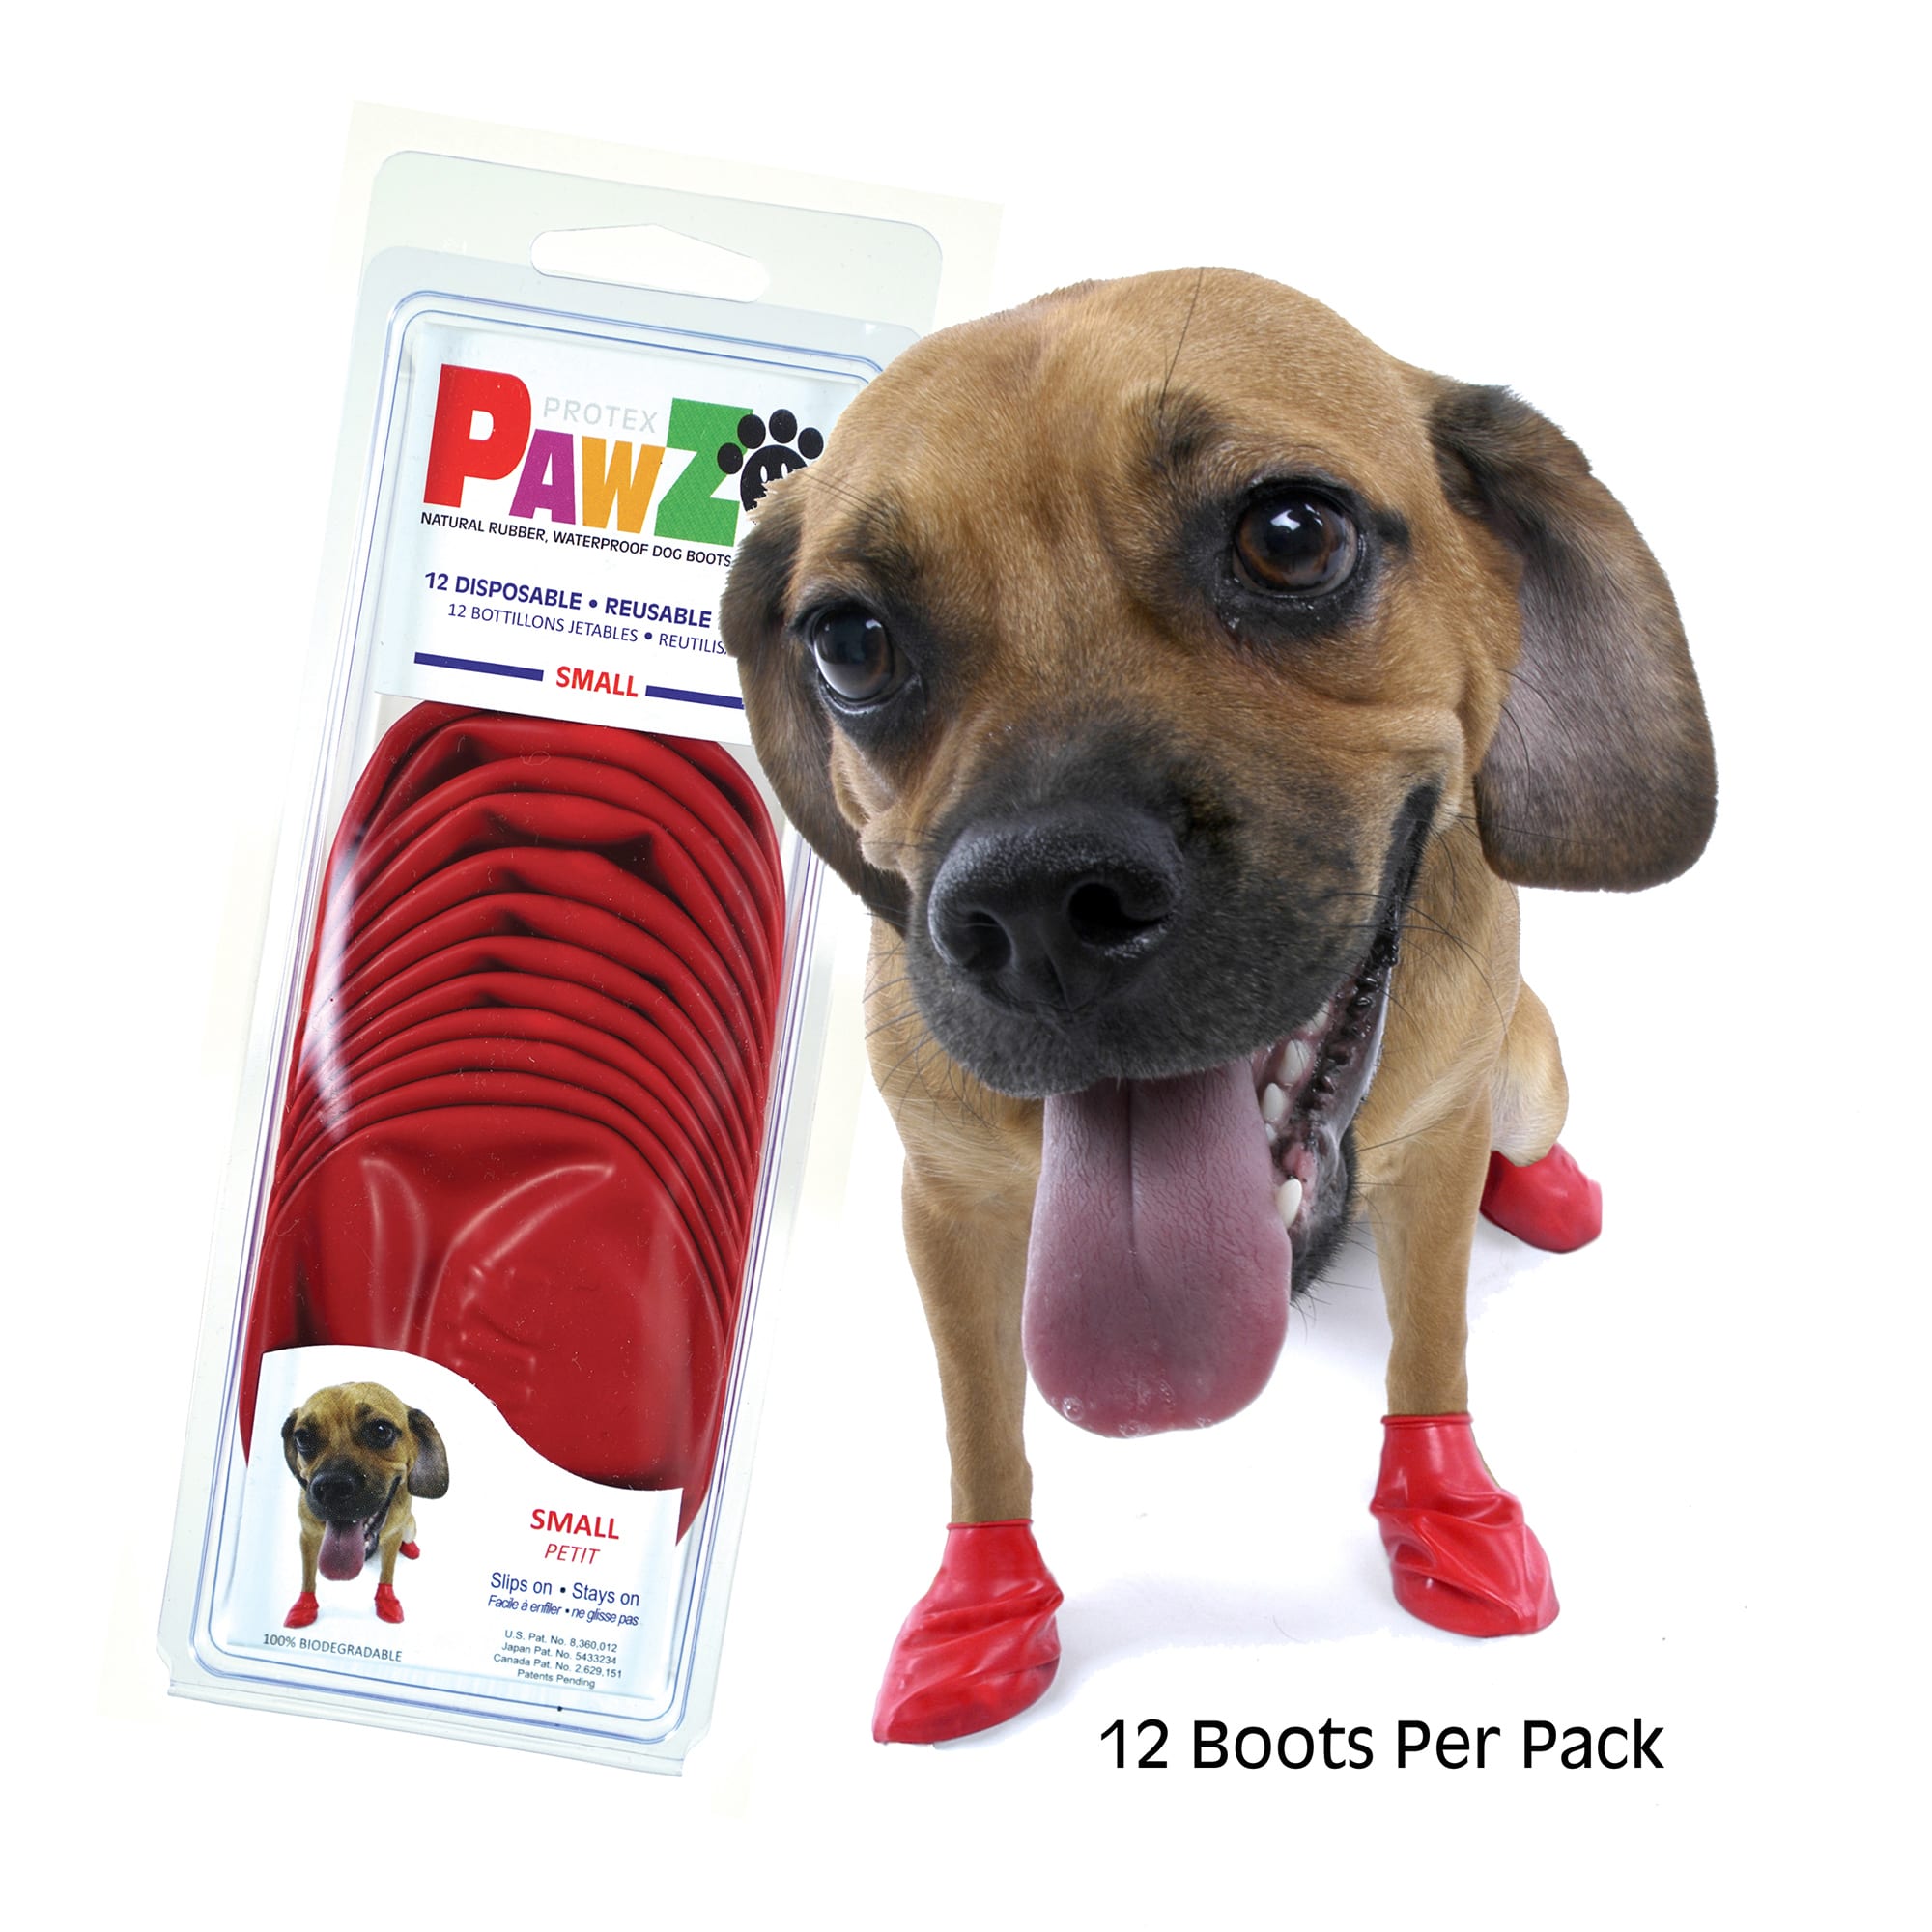 Pawz Natural Rubber Dog Boots 12 pack